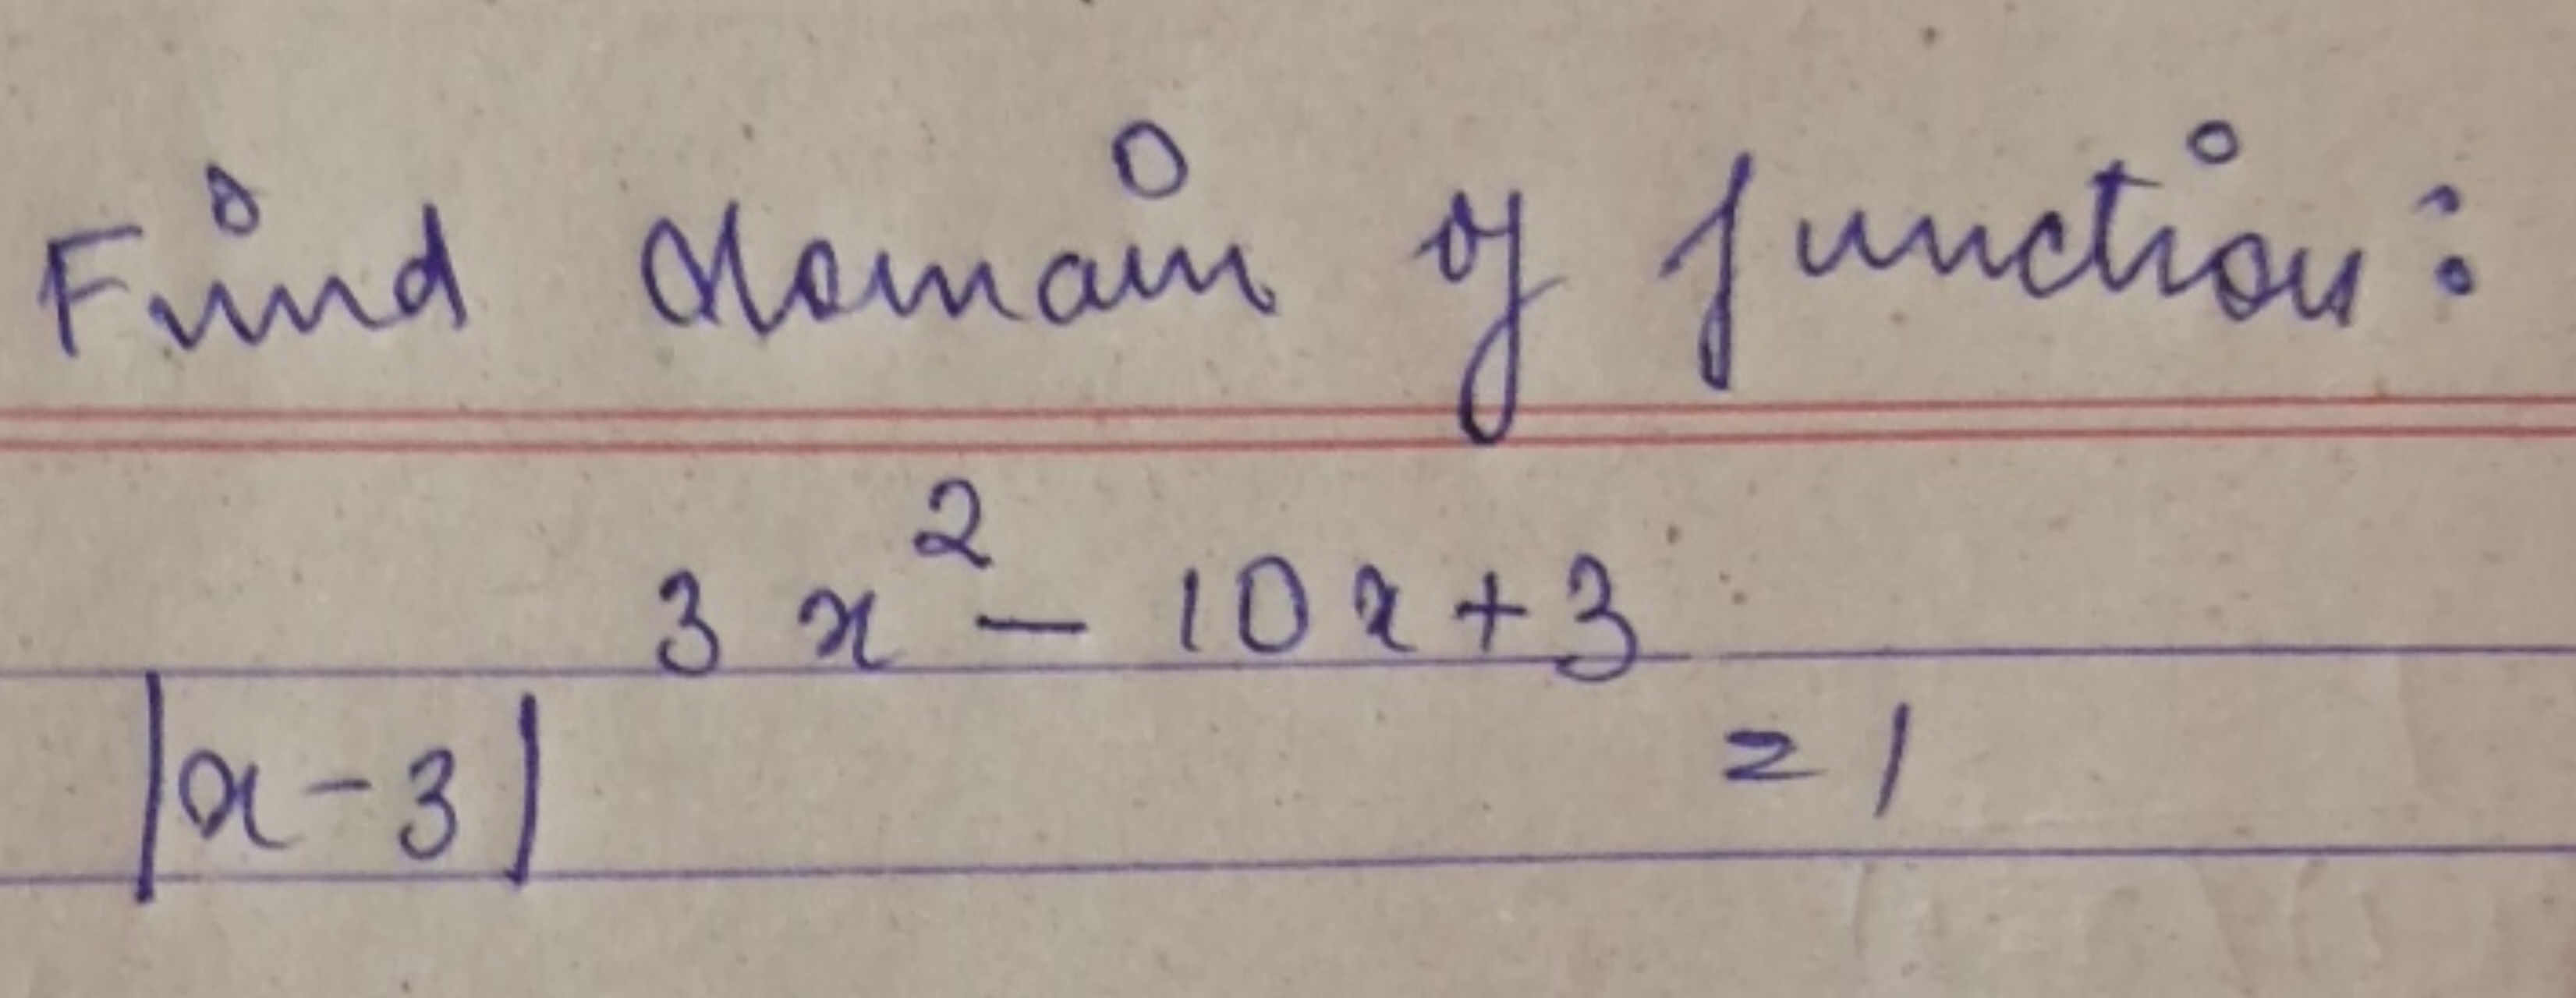 Find domain of function:
∣x−3∣3x2−10x+3=1
